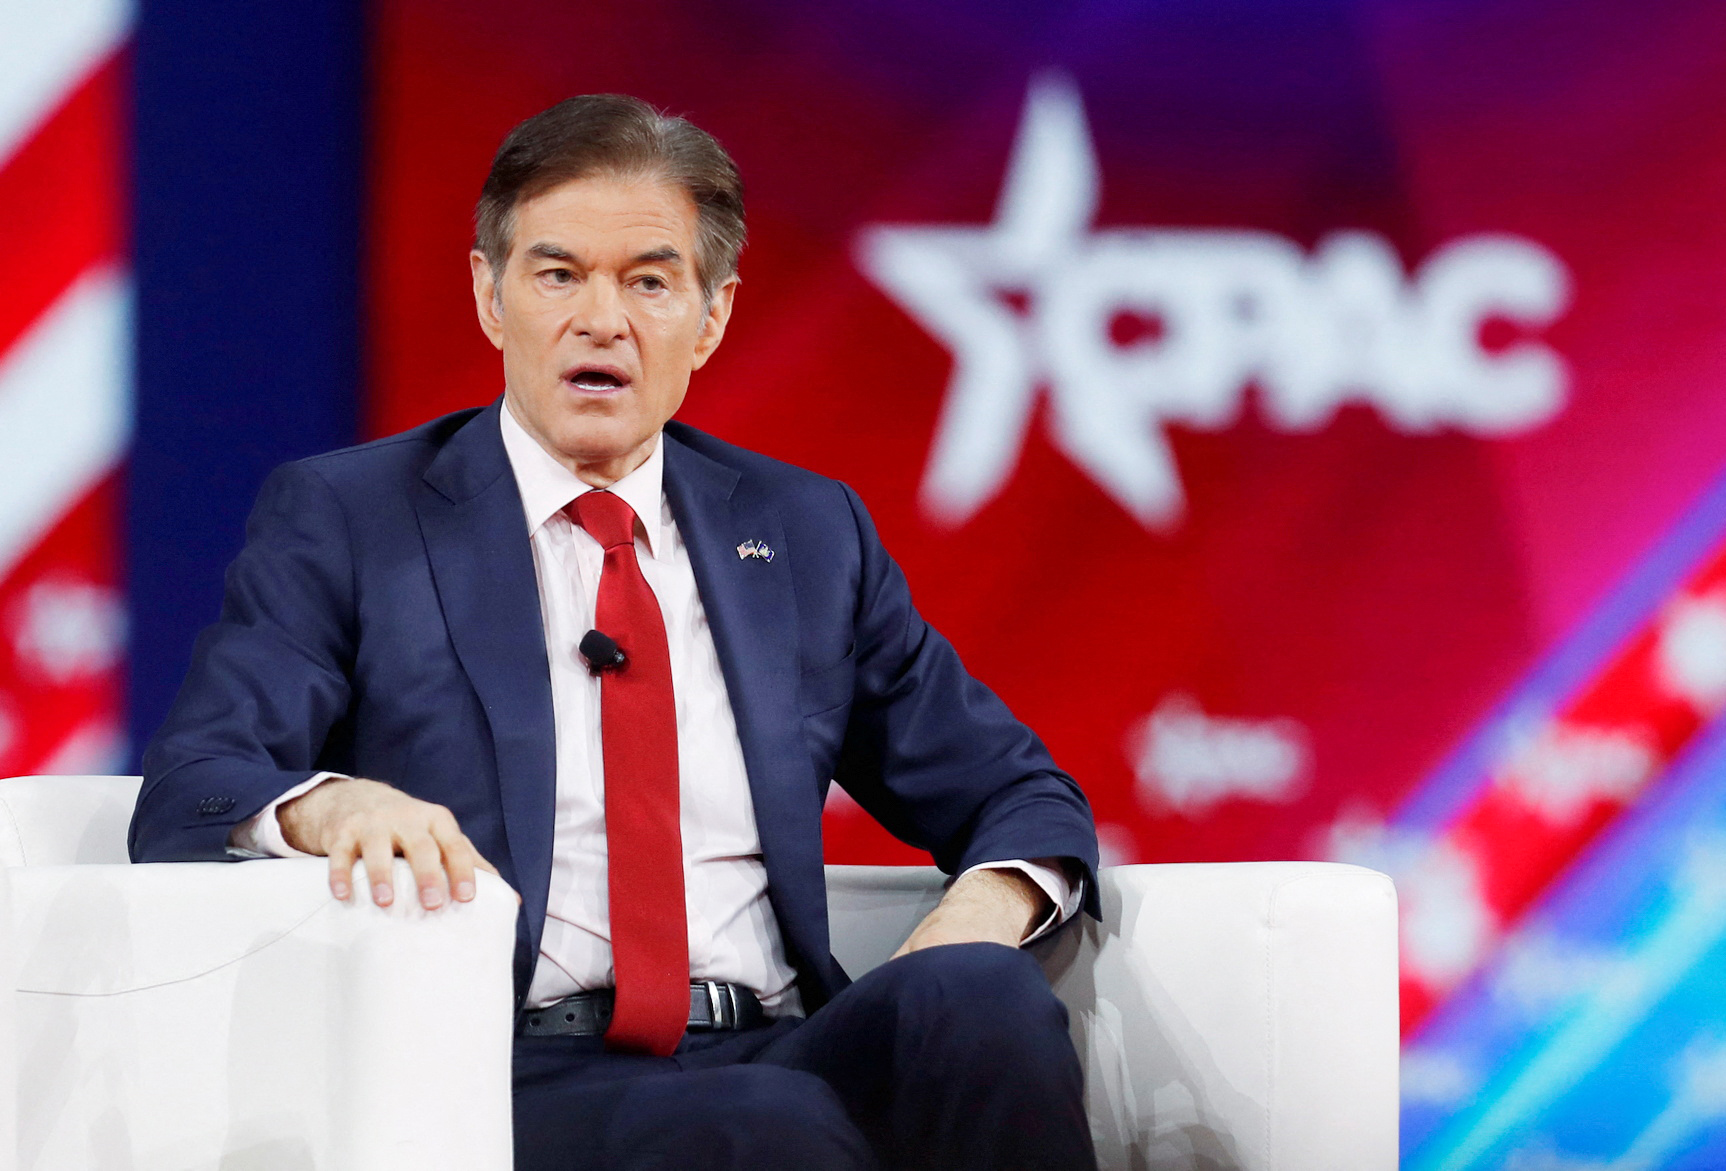 PHOTO: In this Feb. 27, 2022, file photo Dr. Oz speaks at the Conservative Political Action Conference (CPAC) in Orlando, Fla.